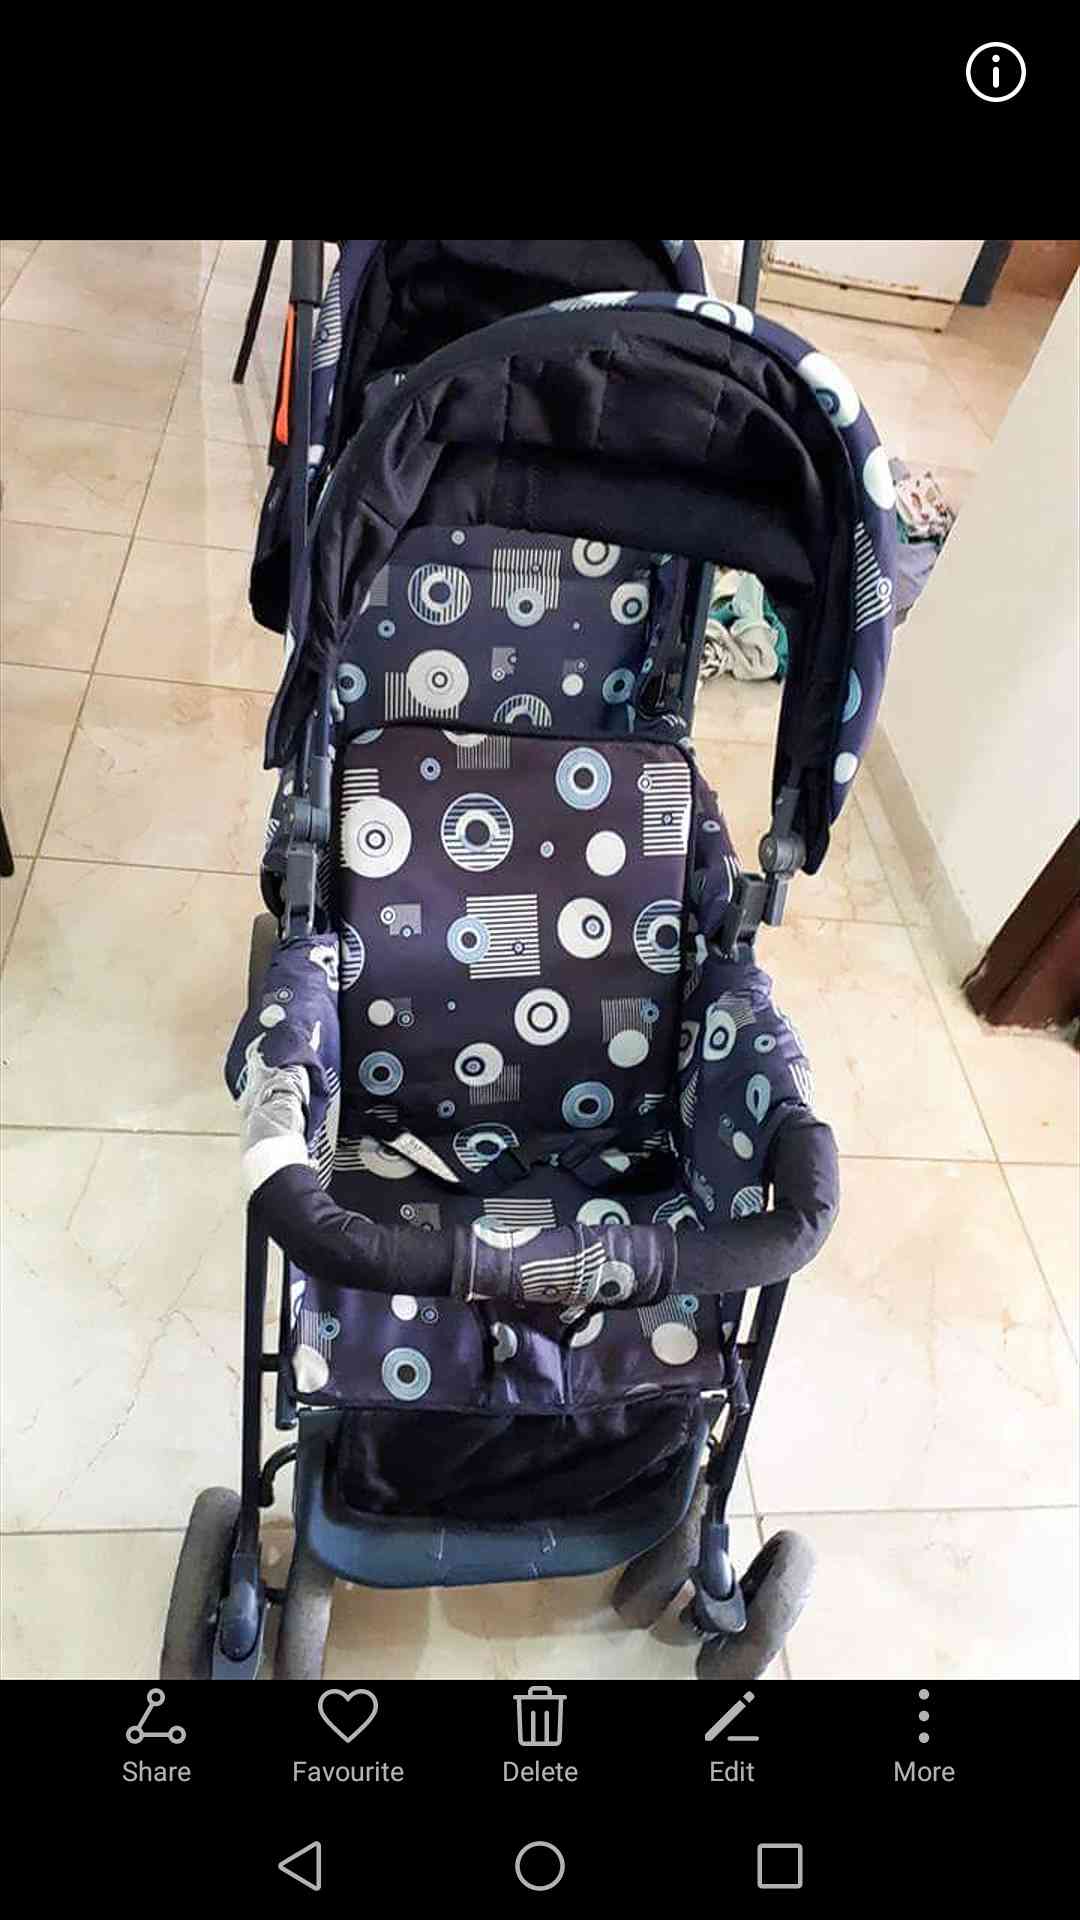 kids car seat ( matches all cars ) in perfect conditiongood as new Barely any damages used only for 2 years Very clean and tidy Suitable for Seat pillow is avai-  عرباية توأم لا تنسَ أنك...